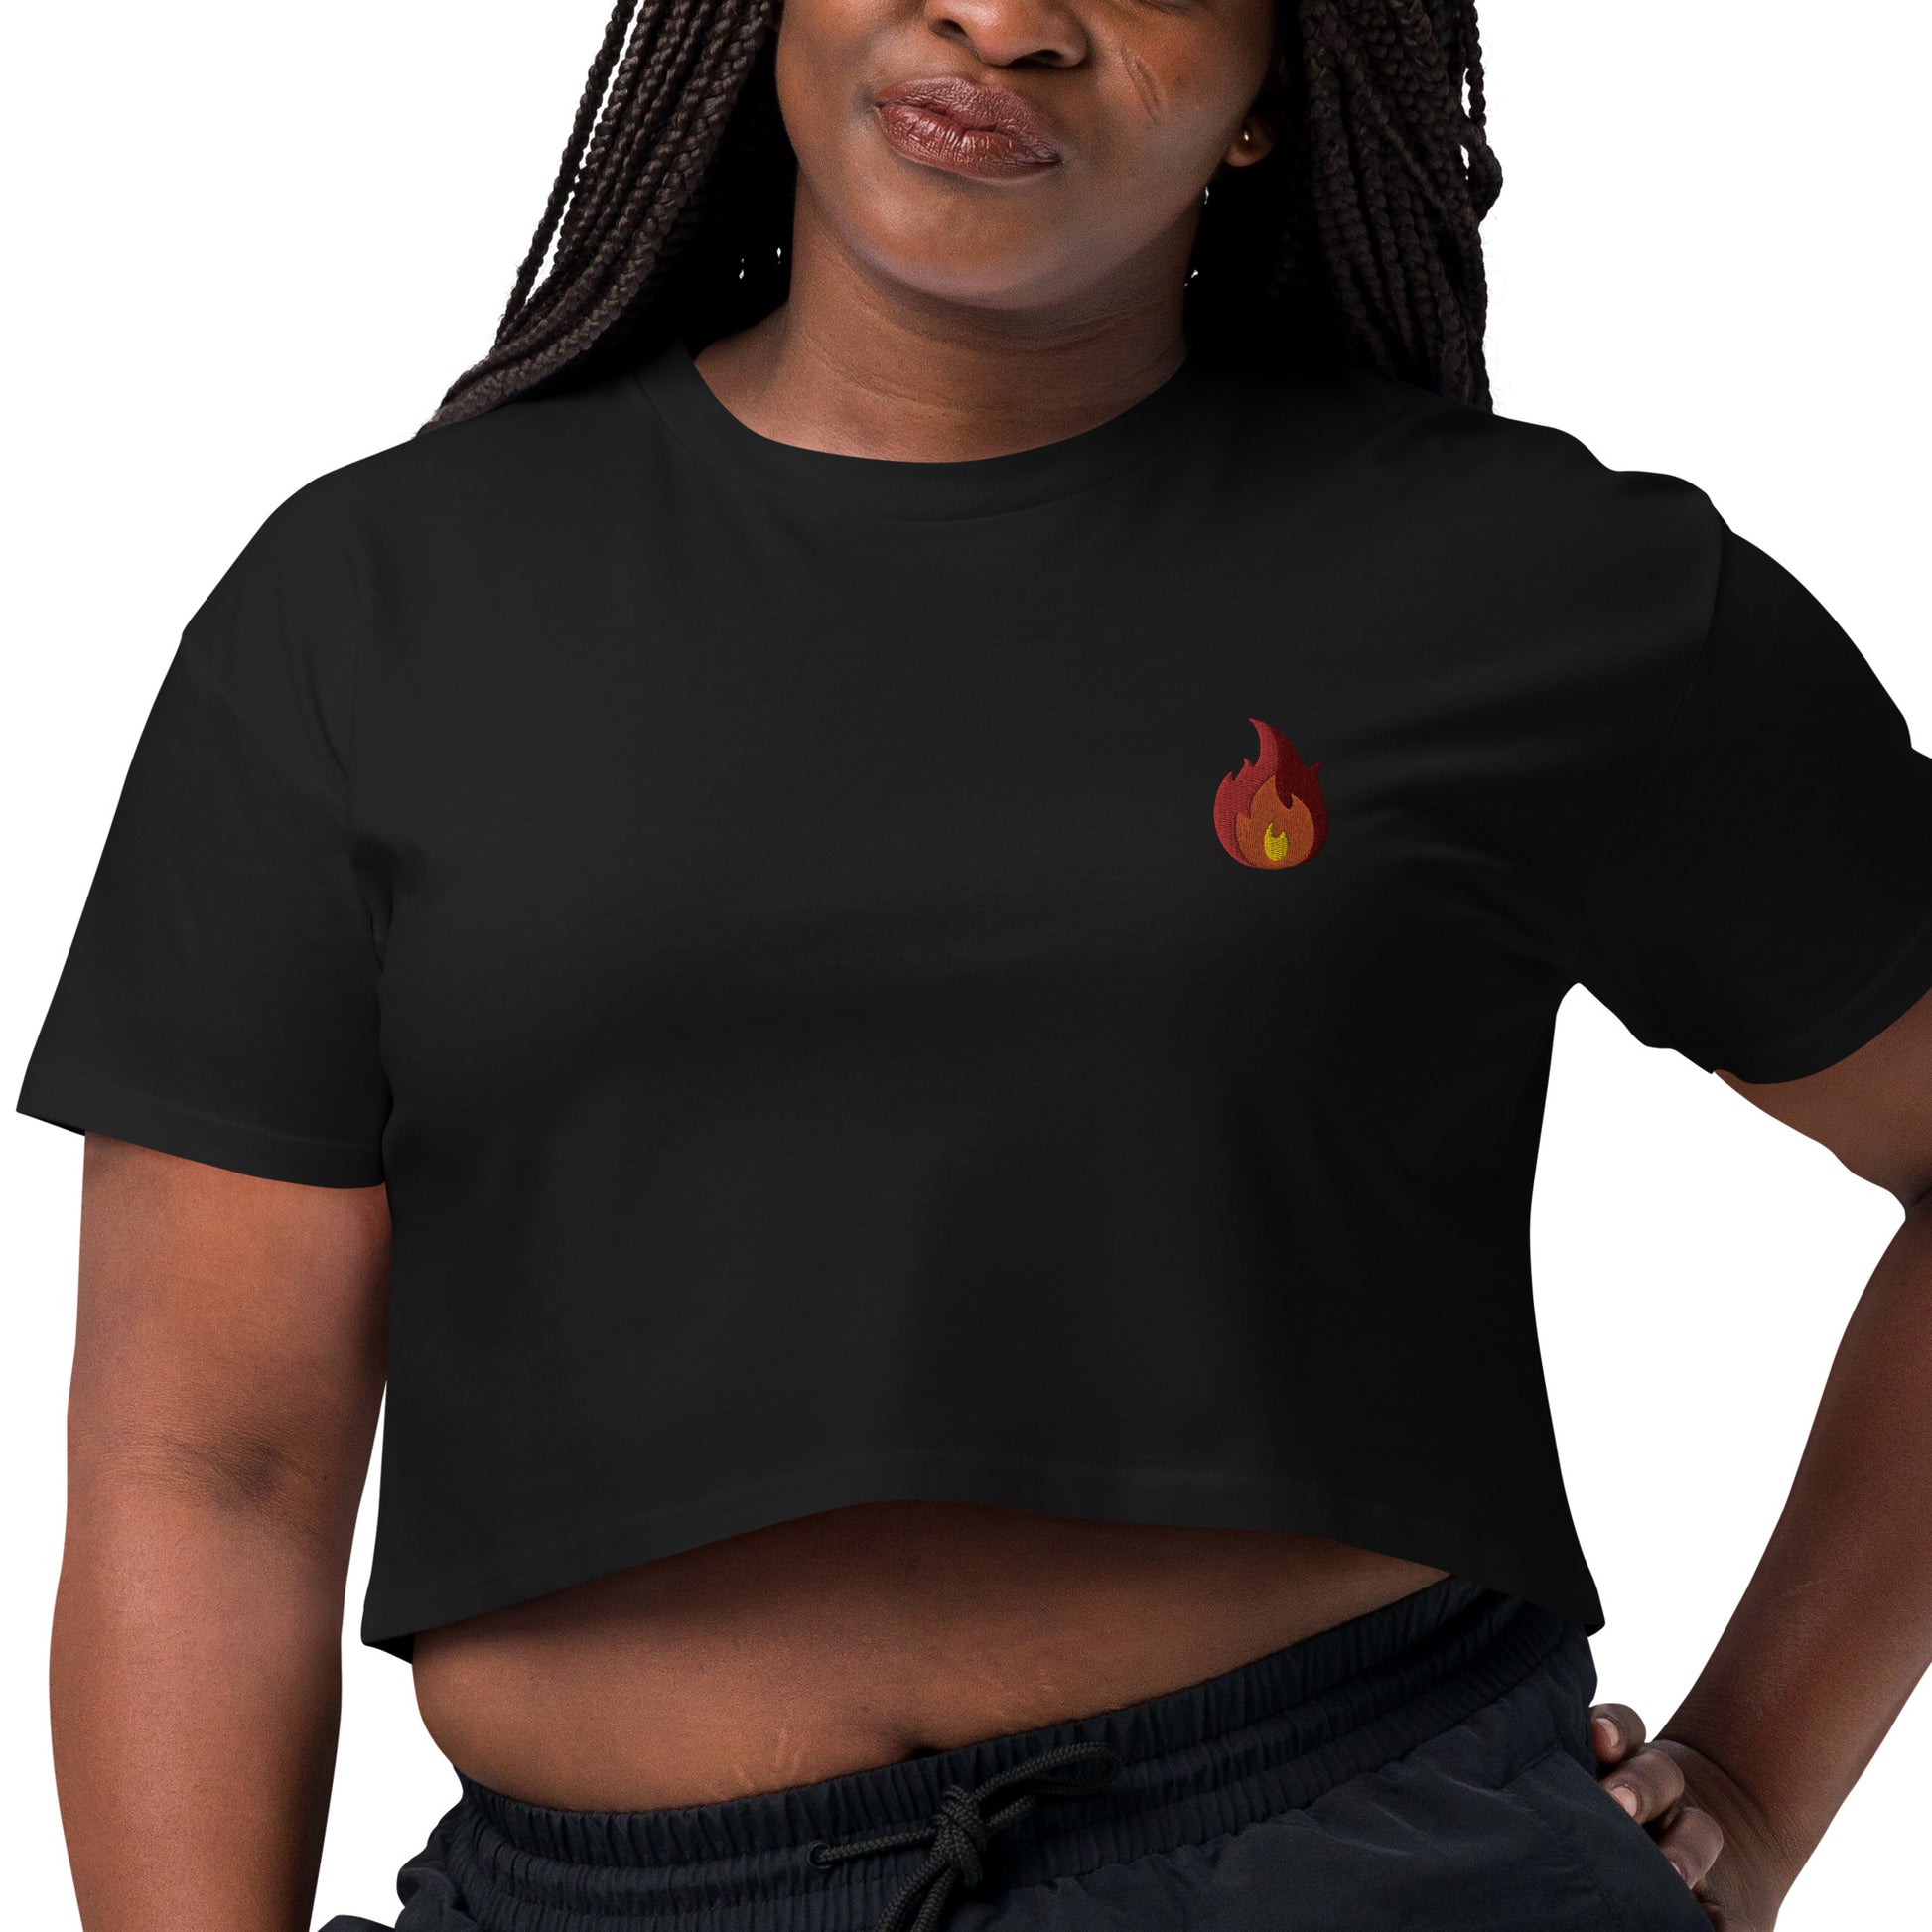 A female model wearing a relaxed black crop top features a modest crop and subtle fire emoji embroidered design, adding a touch of mischief to your look—a playful celebration of gay culture! Made from 100% combed cotton. Available in Extra Small, Small, Medium, Large, Extra Large.